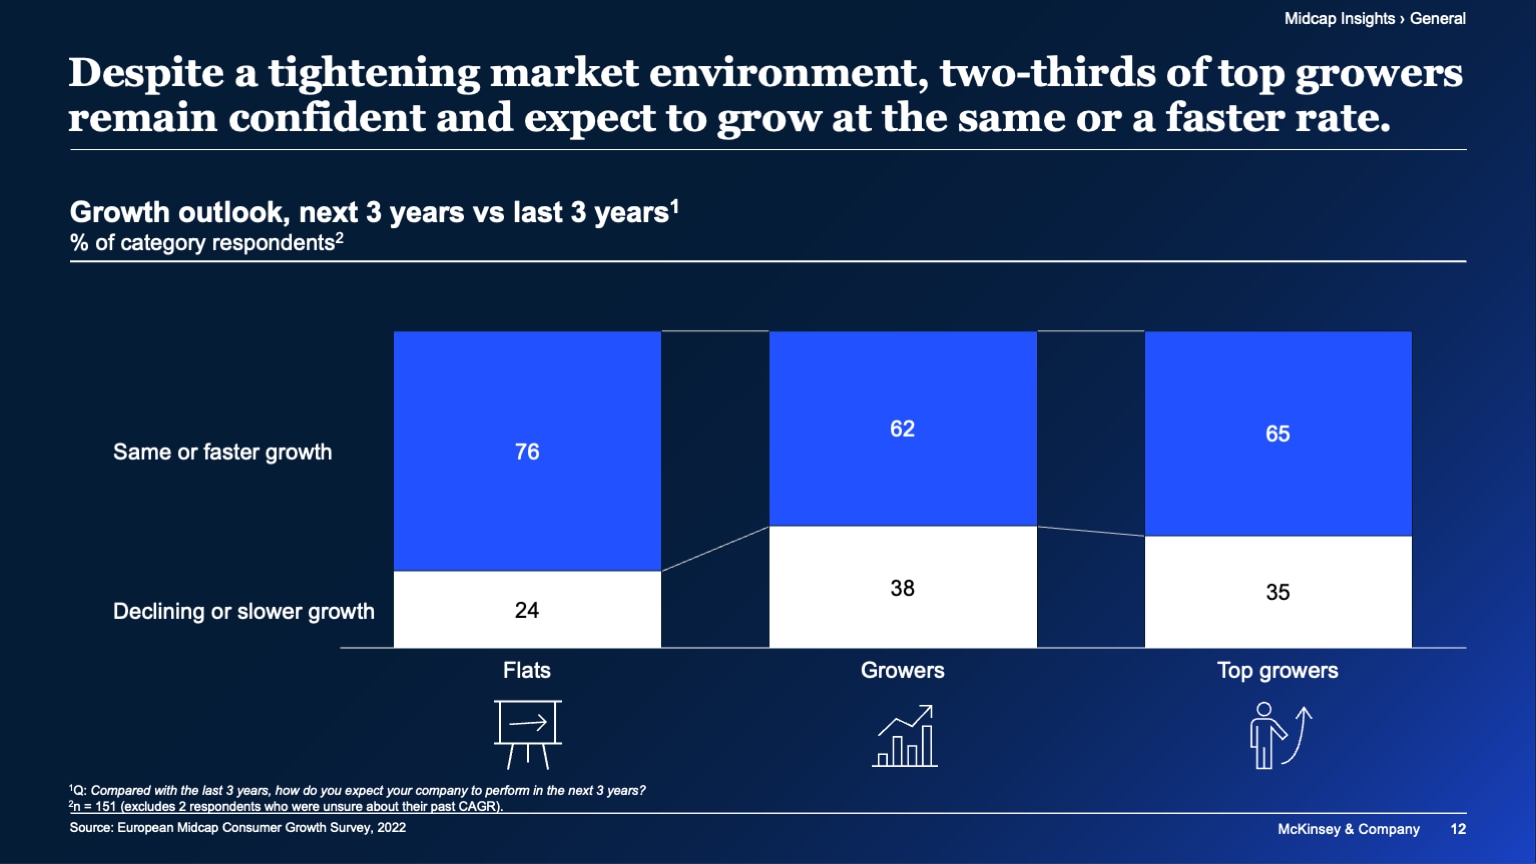 Despite a tightening market environment, two-thirds of top growers remain confident and expect to grow at the same or a faster rate.